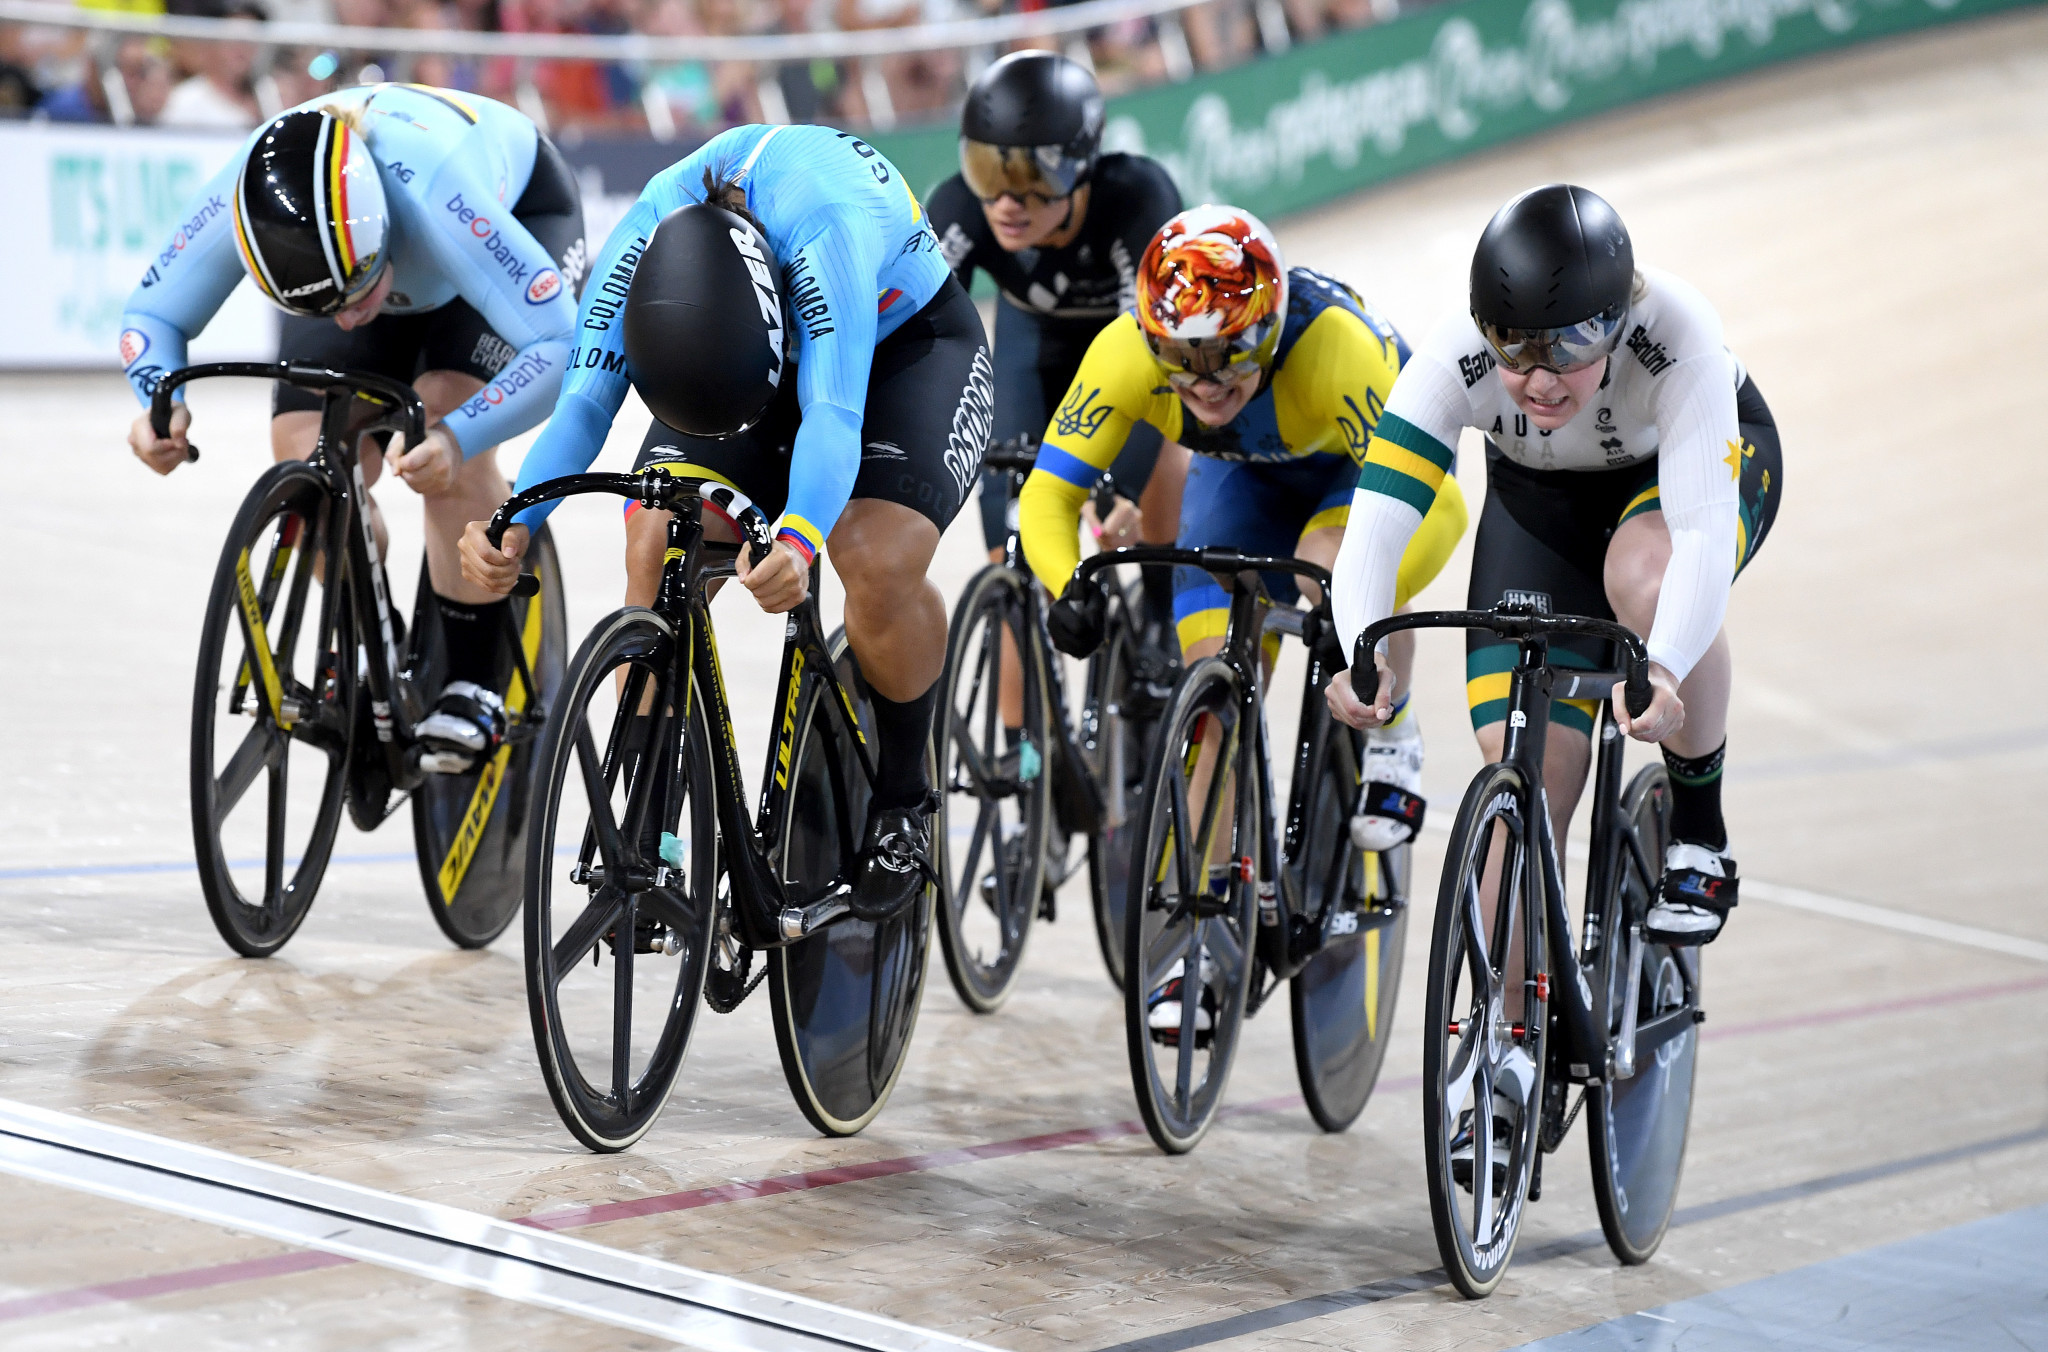 The Japan Keirin Autorace Foundation has become an official contributor for Tokyo 2020 ©Getty Images